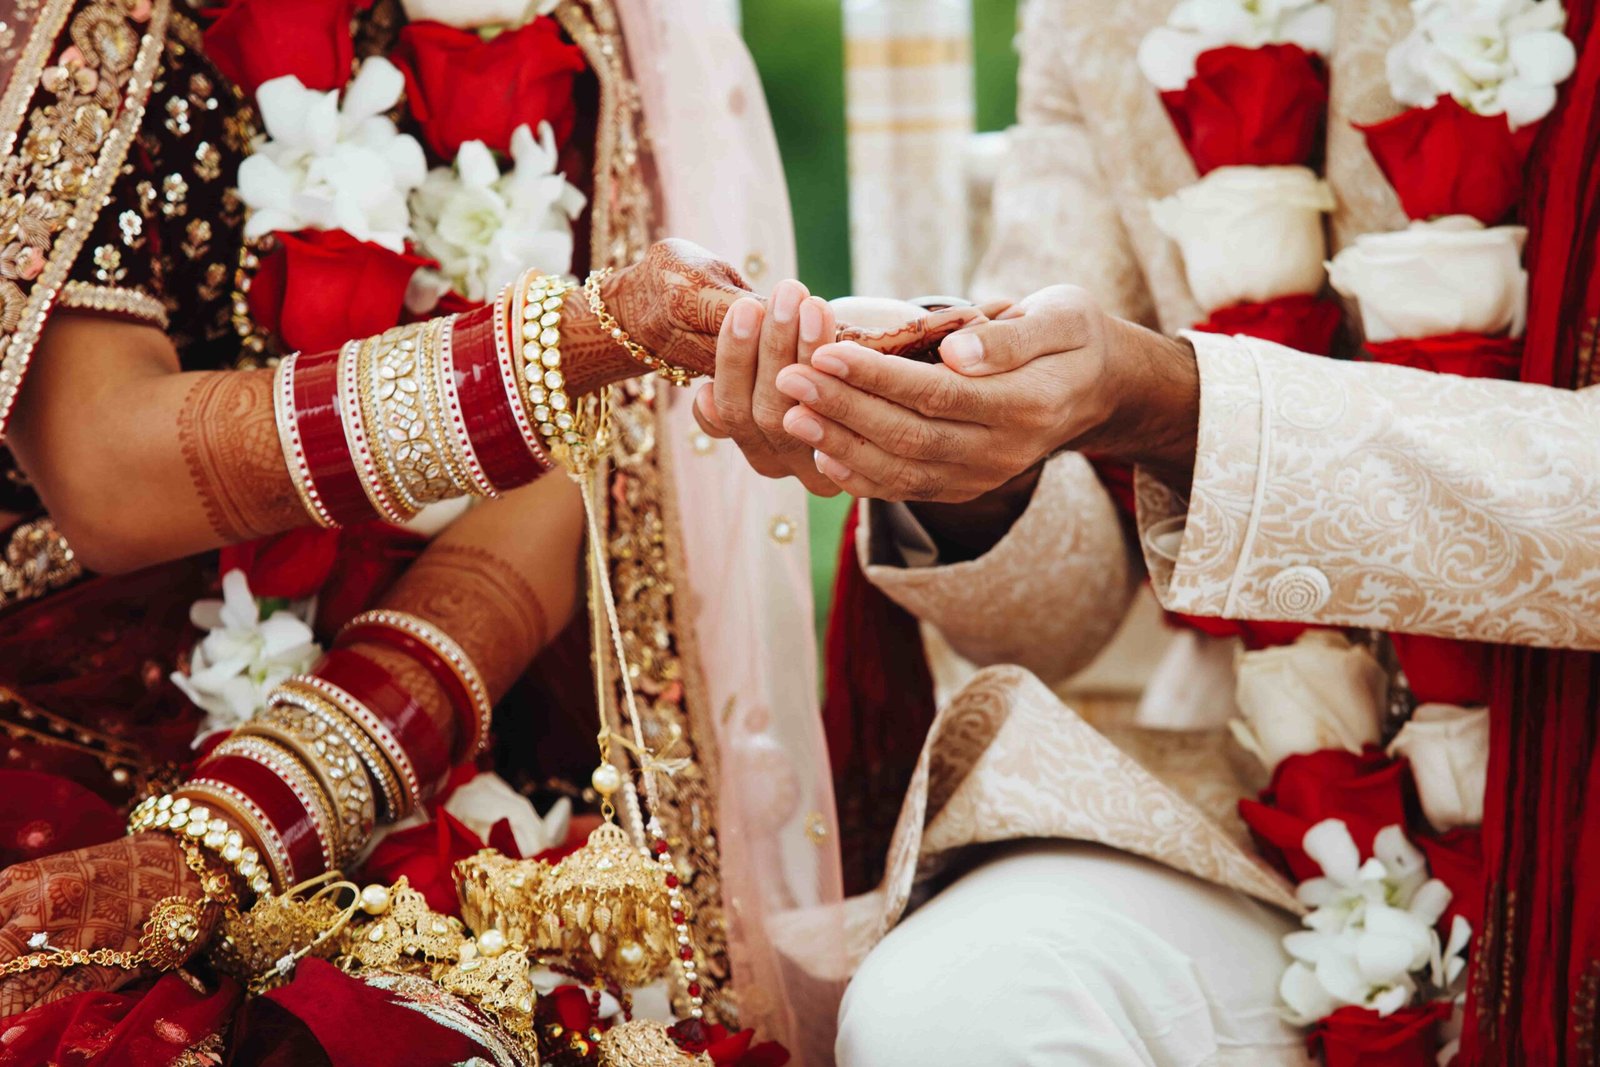 hands-indian-bride-groom-intertwined-together-making-authentic-wedding-ritual (1)